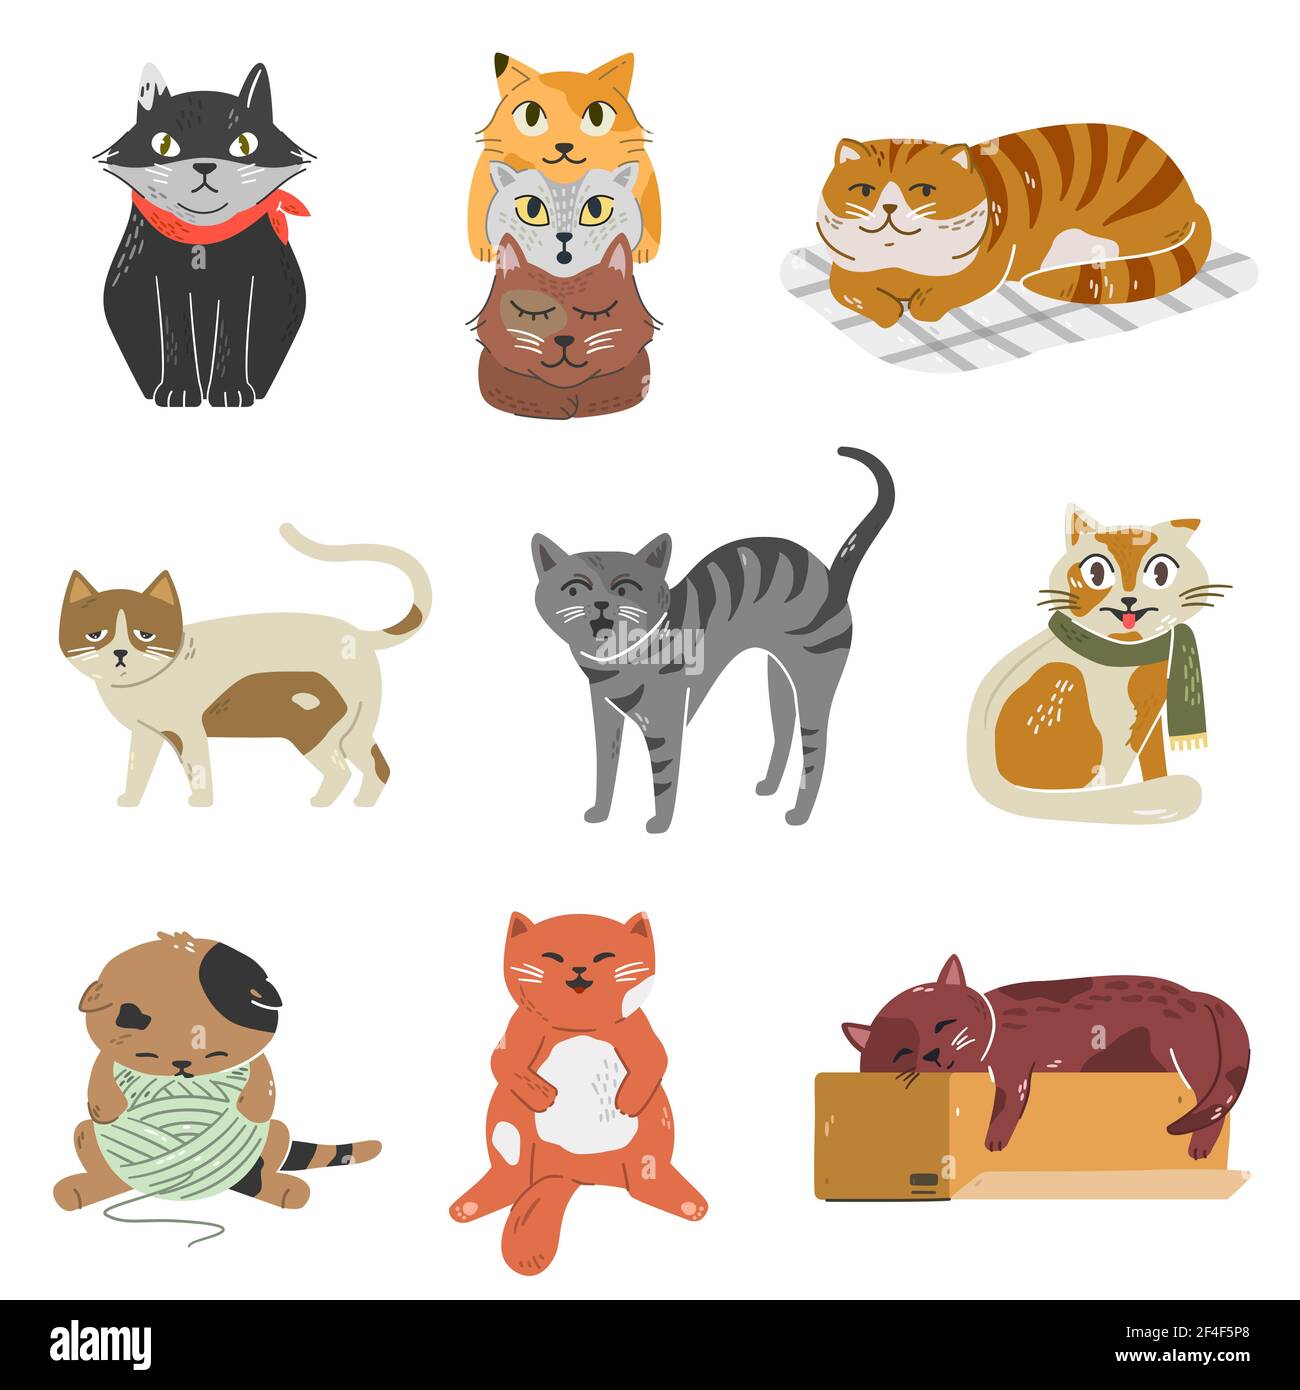 Variety of breeds cats with different poses and emotions. Collection of adorable kittens. Stock Vector